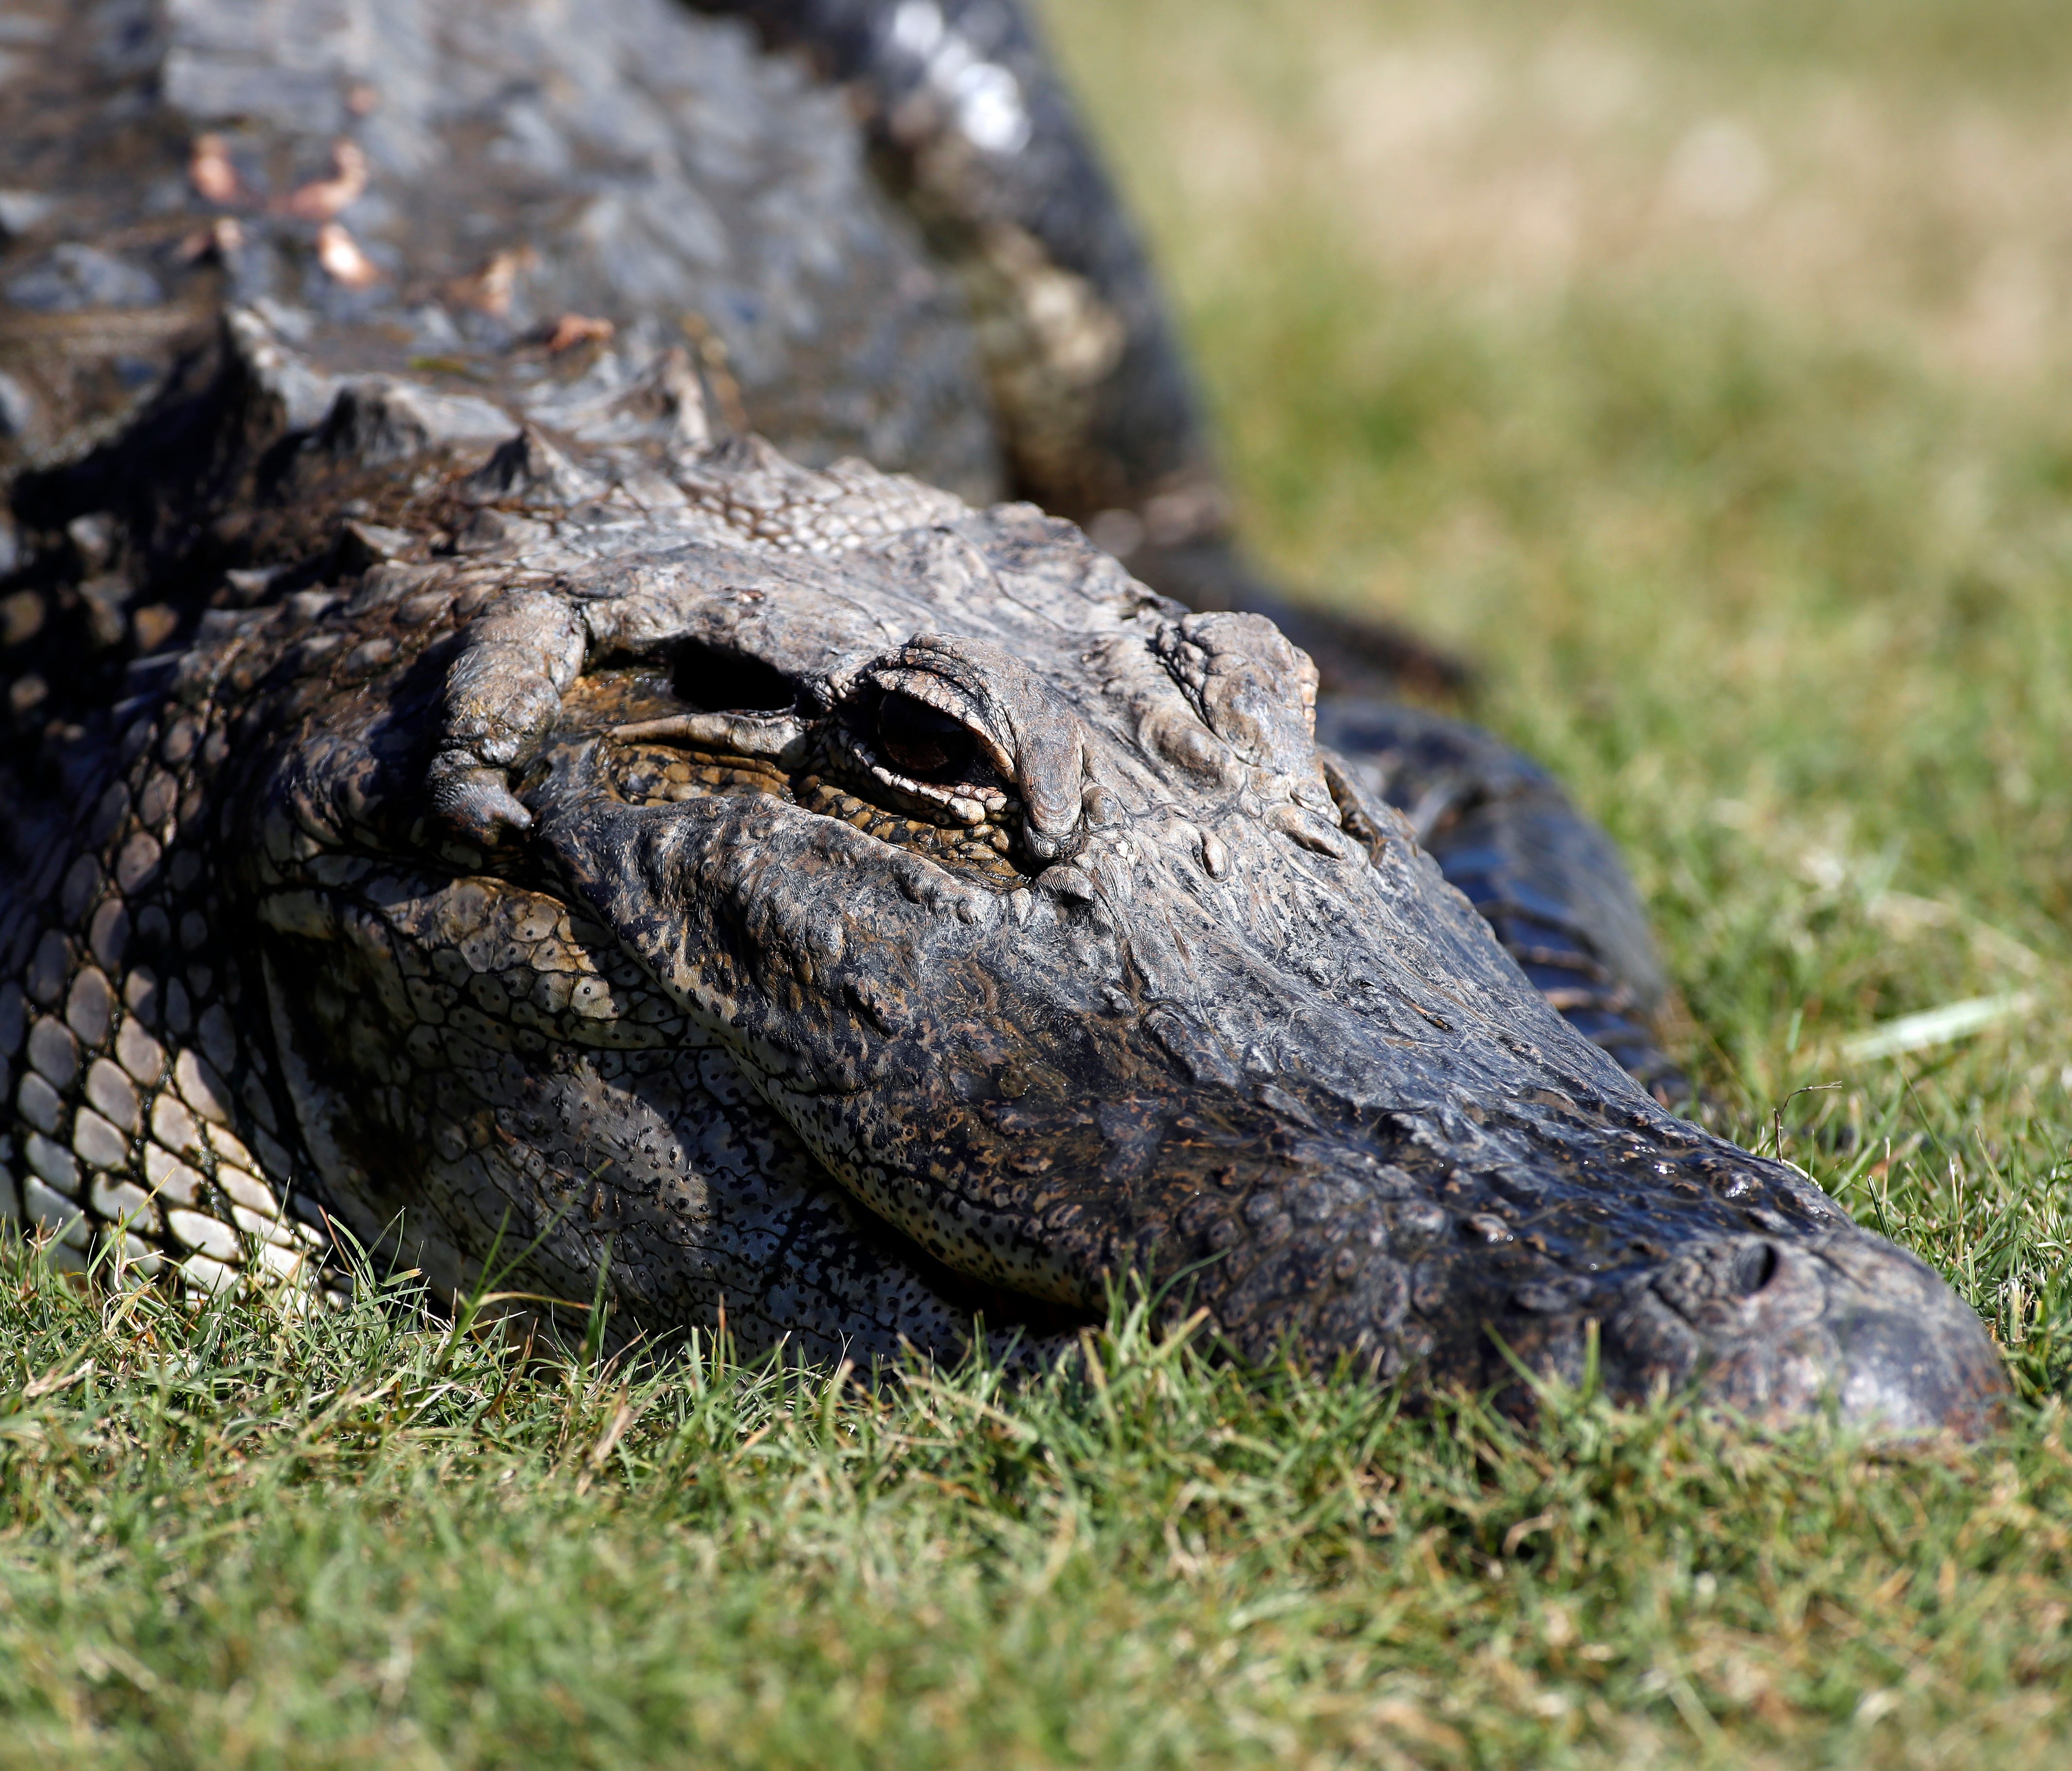 This file photo from April 2018 shows an alligator in Louisiana.